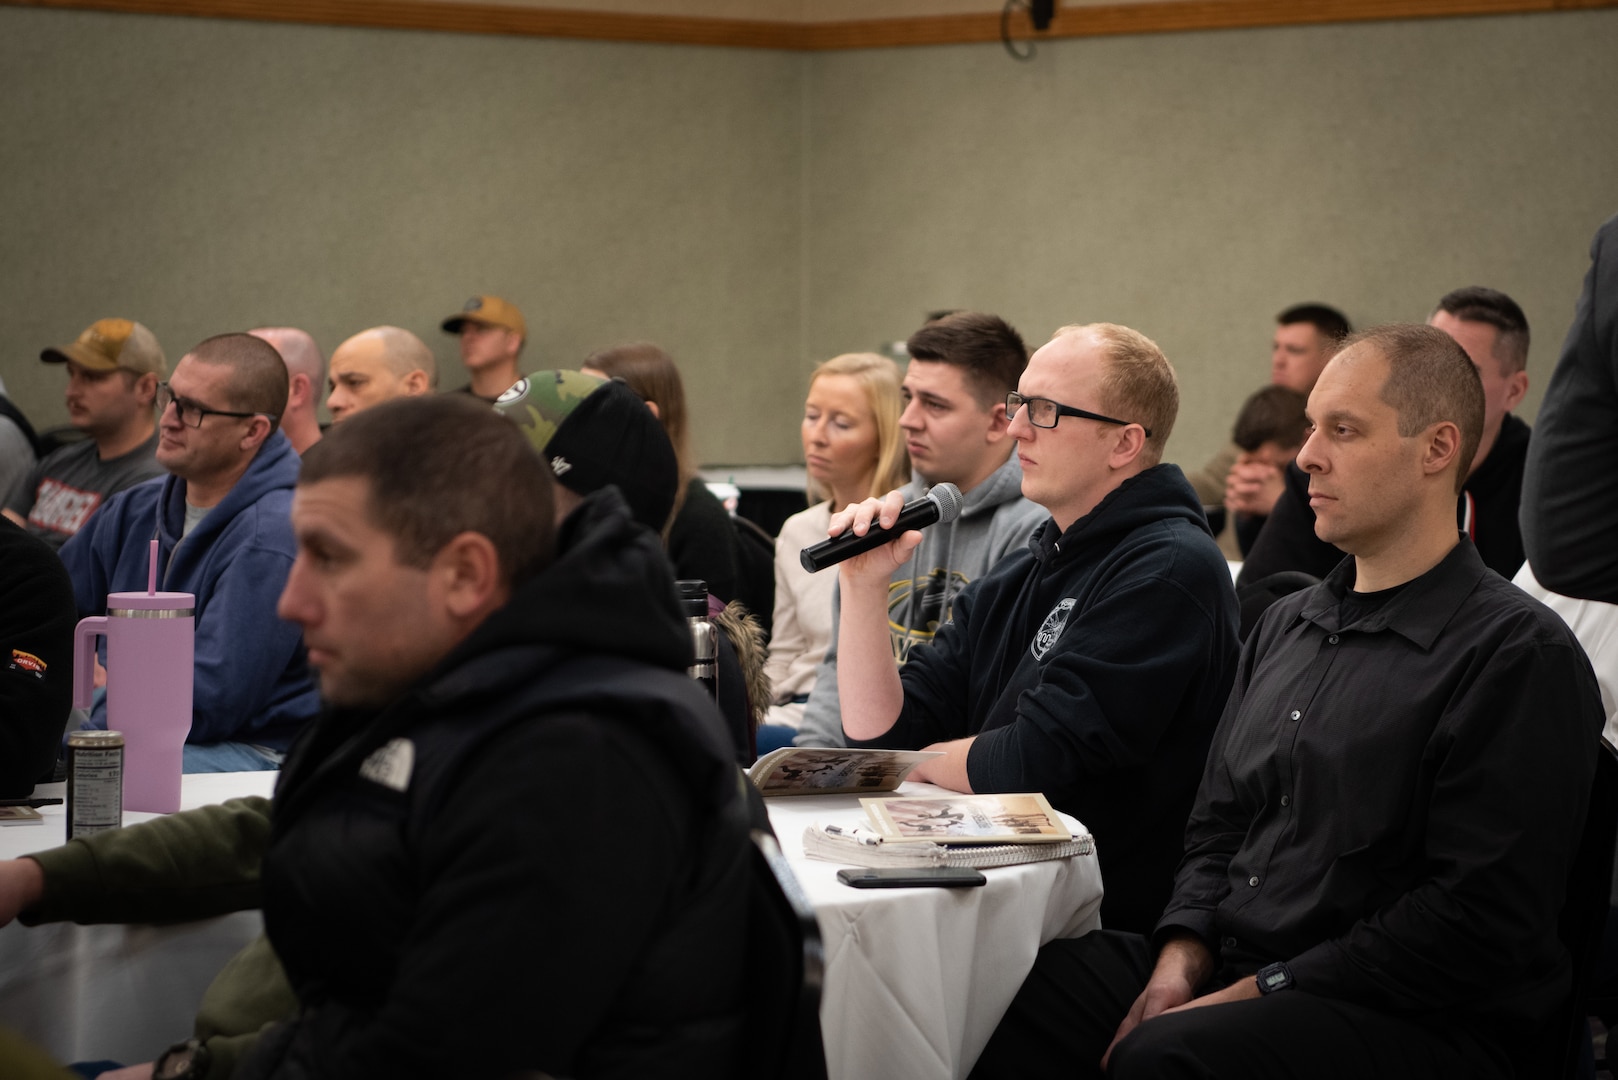 Airmen from the 128th Air Refueling Wing convened at the Oak Creek Community Center for a seminar on dealing with difficulties incurred by military service called Brothers at War and sponsored by the Gary Sinise Foundation, Dec. 3, 2023. The event. coordinated by the Airman & Family Readiness Center. served to further a sense of community and connection among wing Airmen. (U.S. Air National Guard photo by Airman Cynthia Yang)